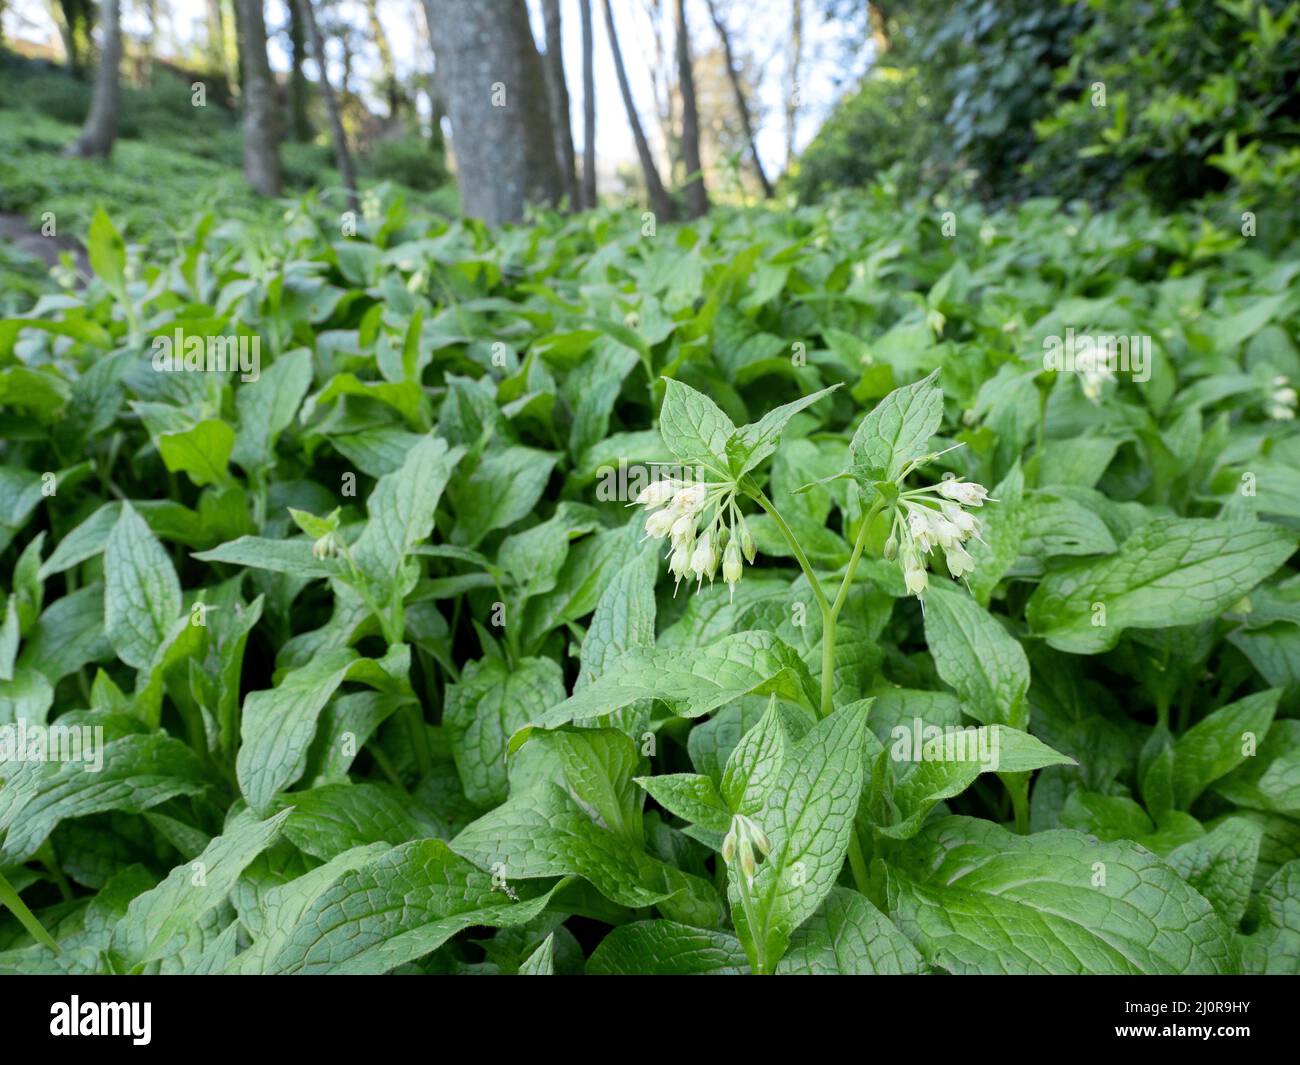 Common Comfrey Symphytum officinale clothing the woodland floor at Pensylvania Wood above Church Ope Cove on the Isle of Portland Dorset UK Stock Photo